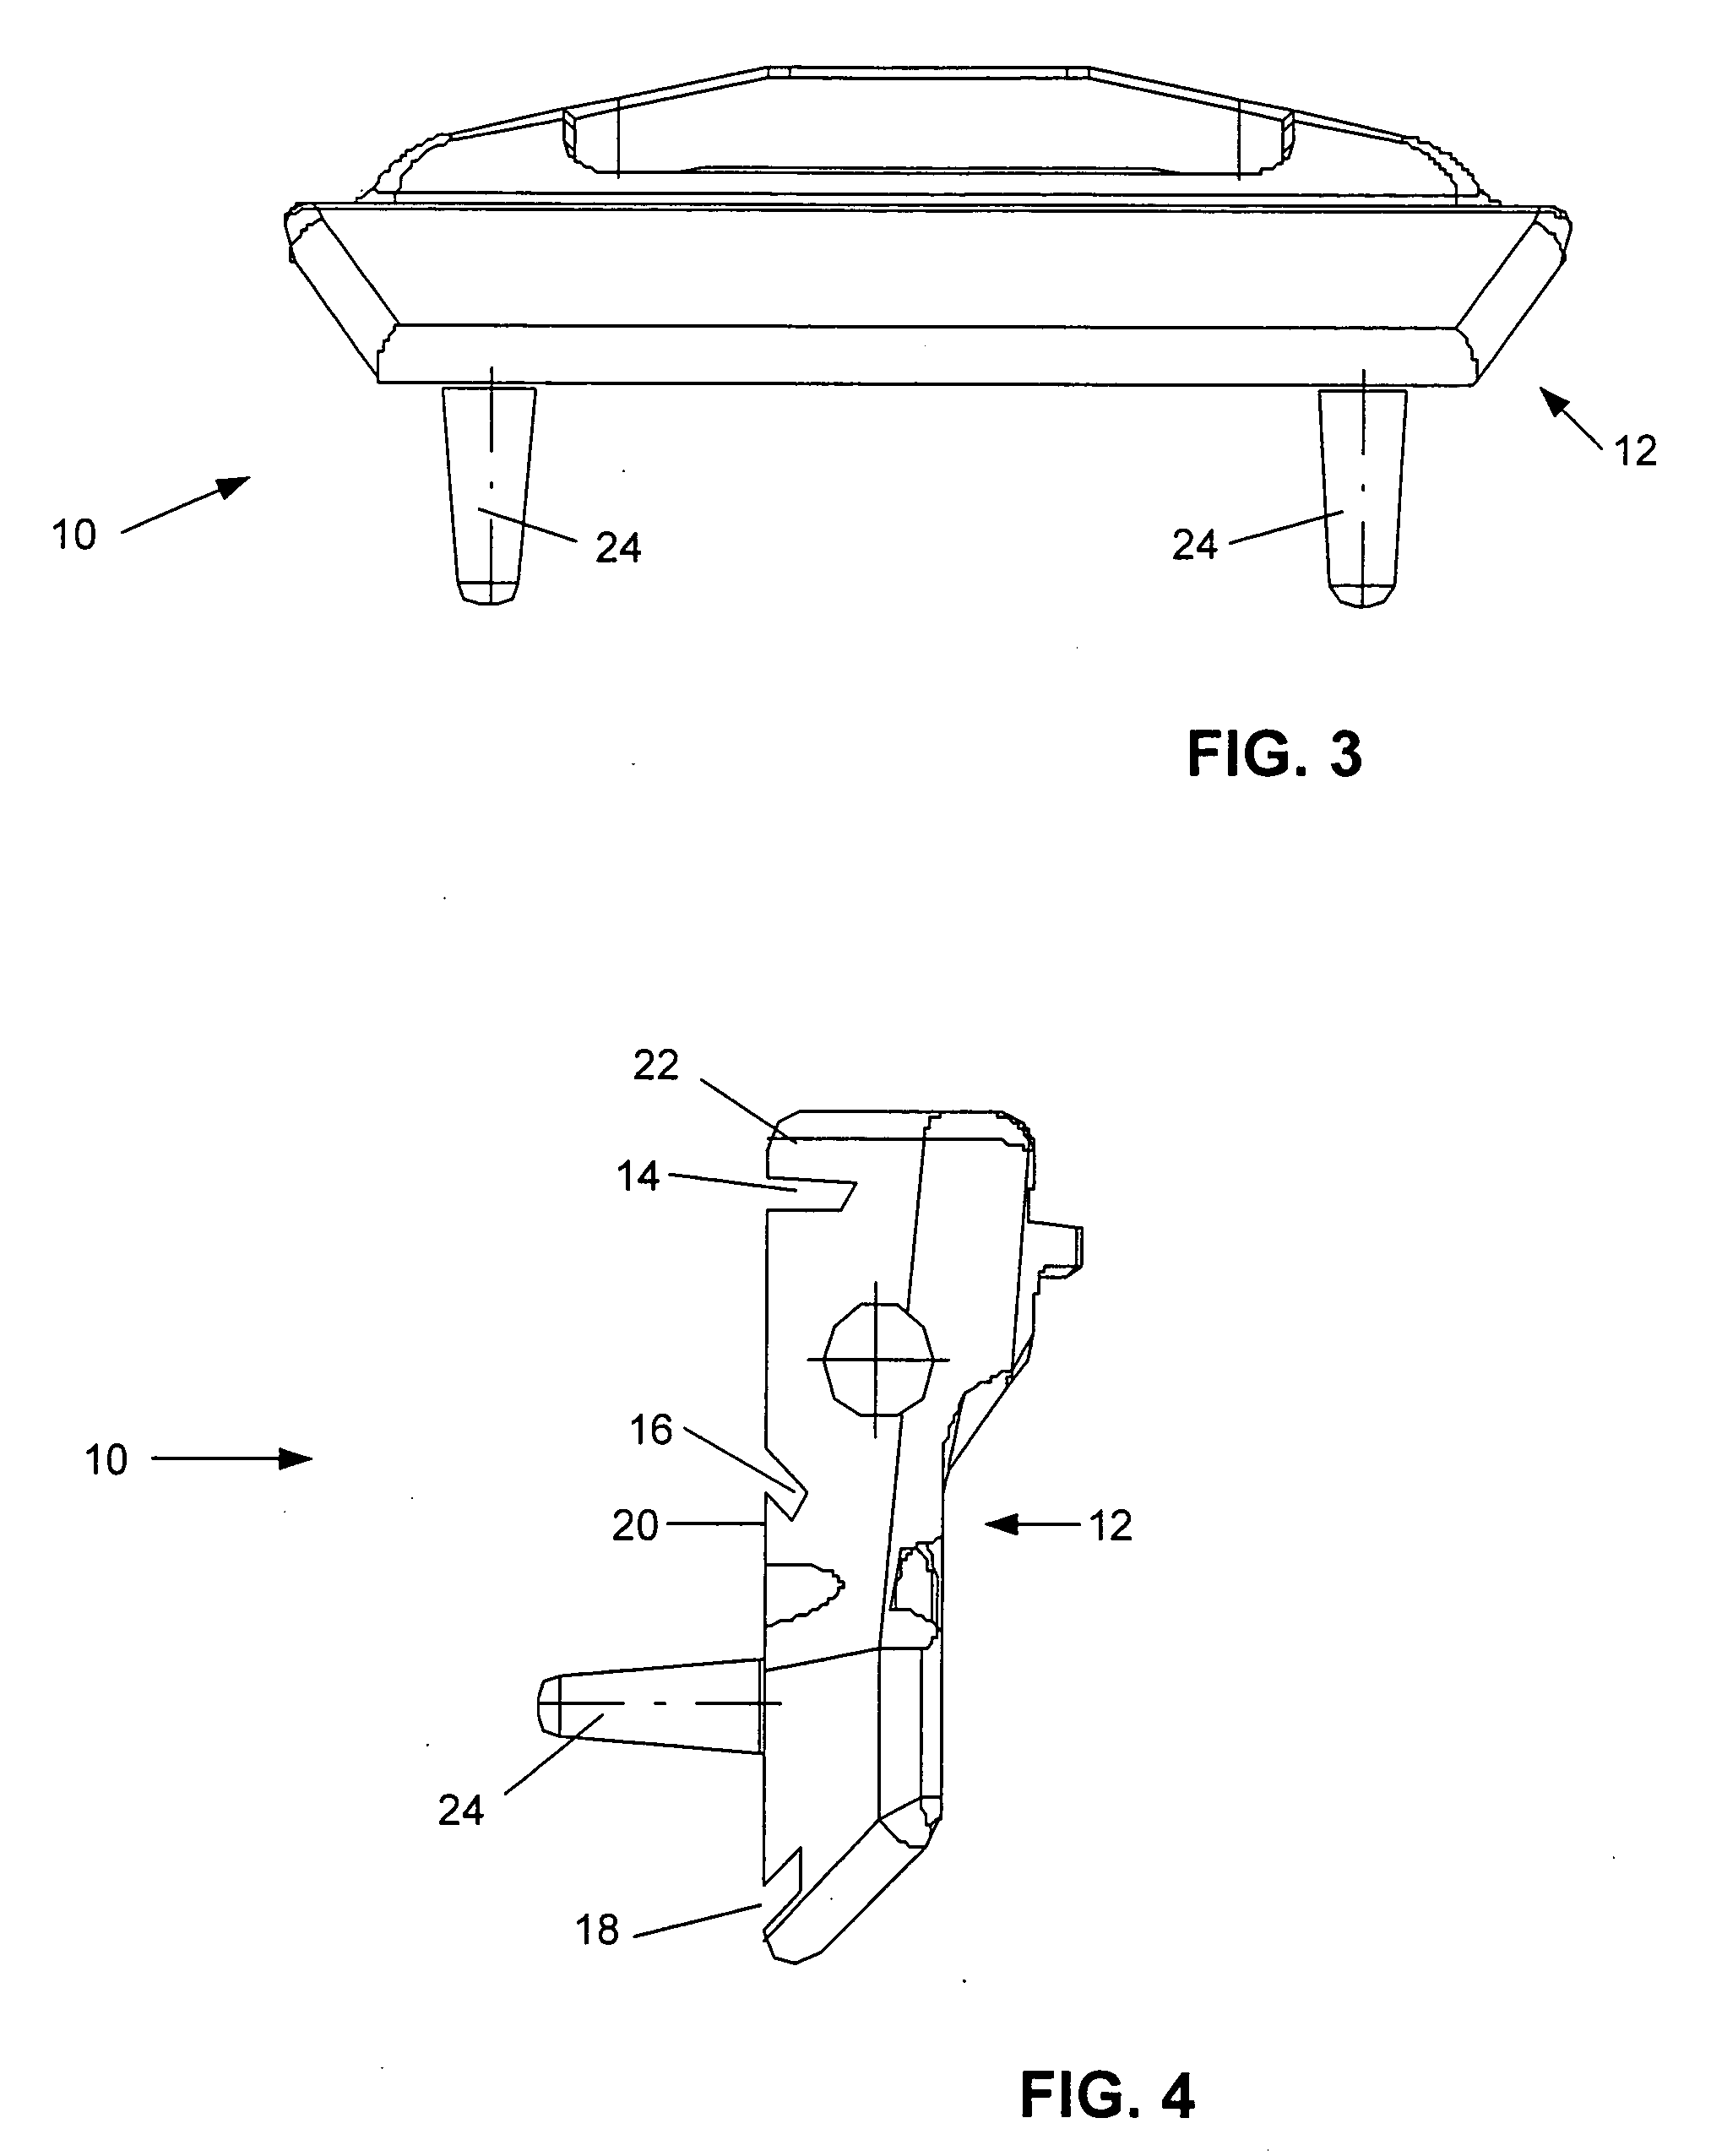 Cutting blocks for a surgical procedure and methods for using cutting blocks